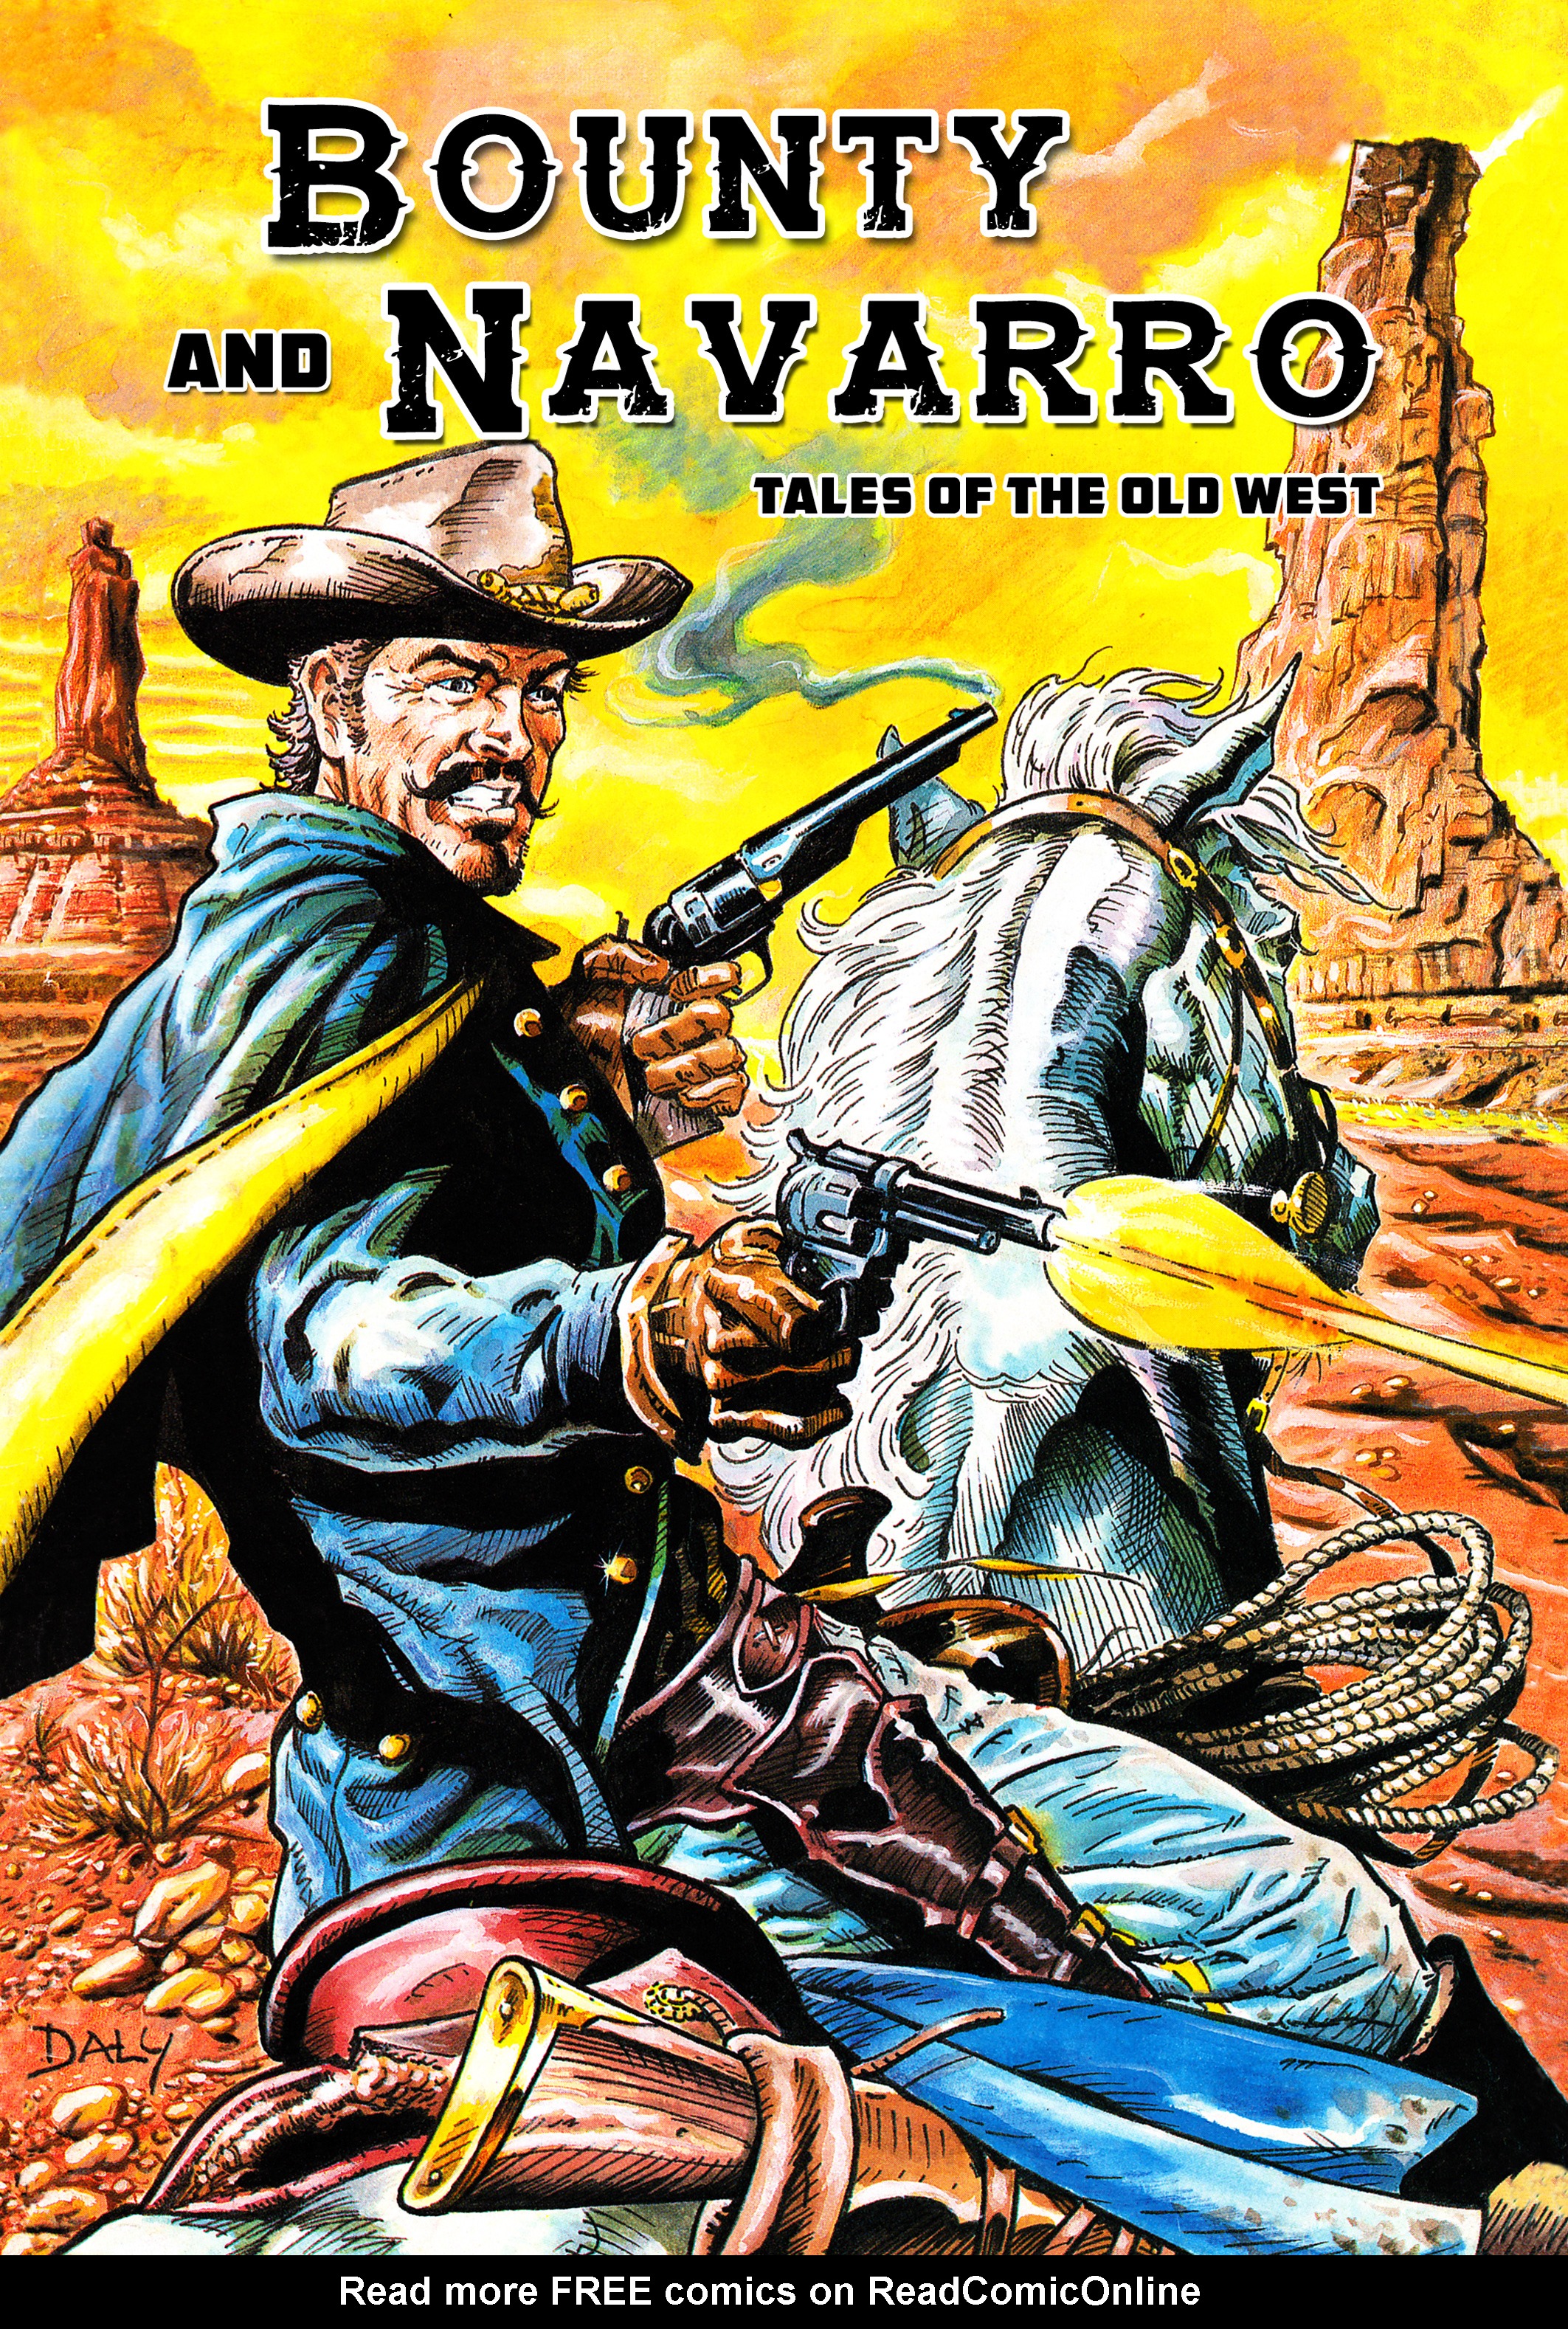 Read online Bounty and Navarro: Tales of the Old West comic -  Issue # TPB - 1